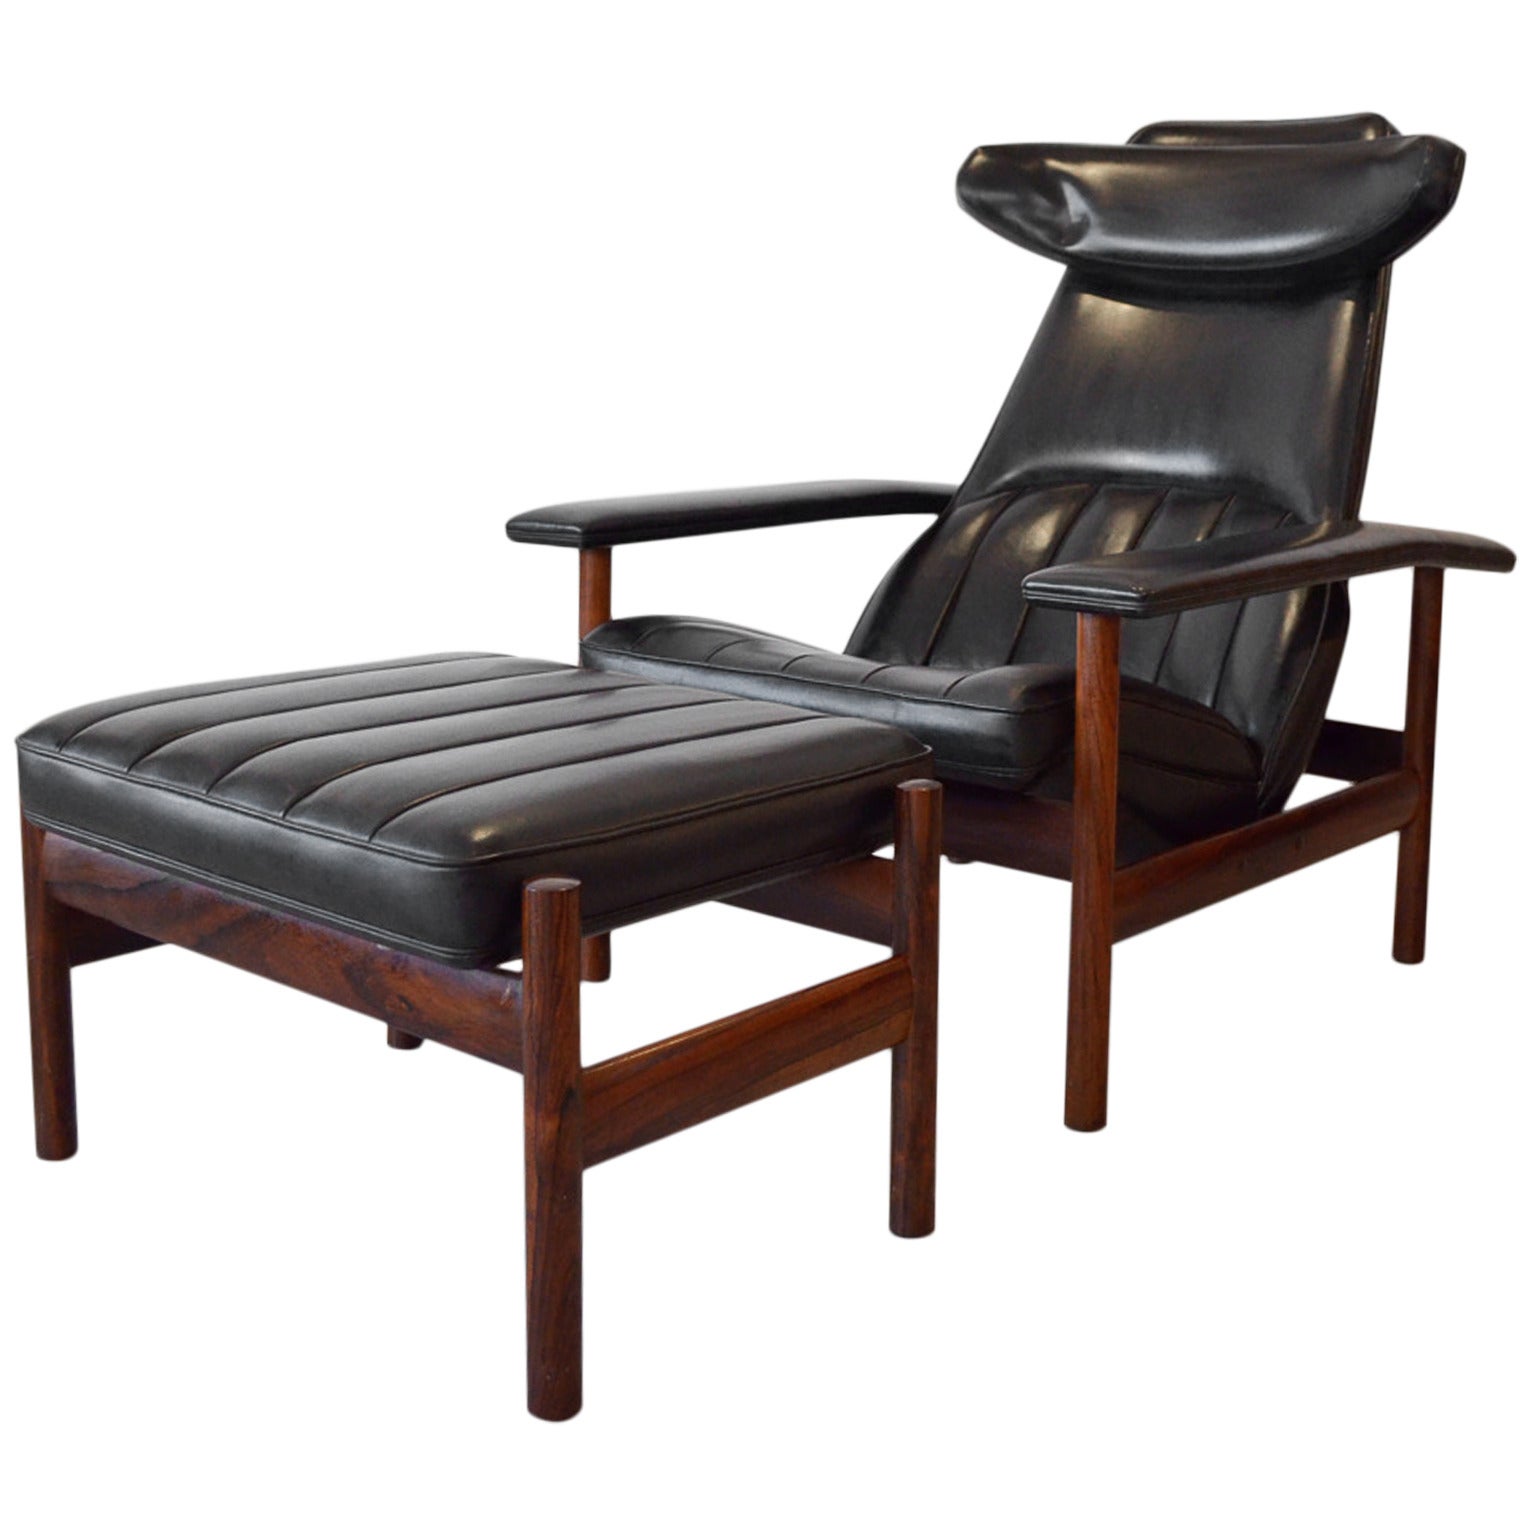 Rare Rosewood Lounge Chair and Ottoman by Sven Ivar Dysthe